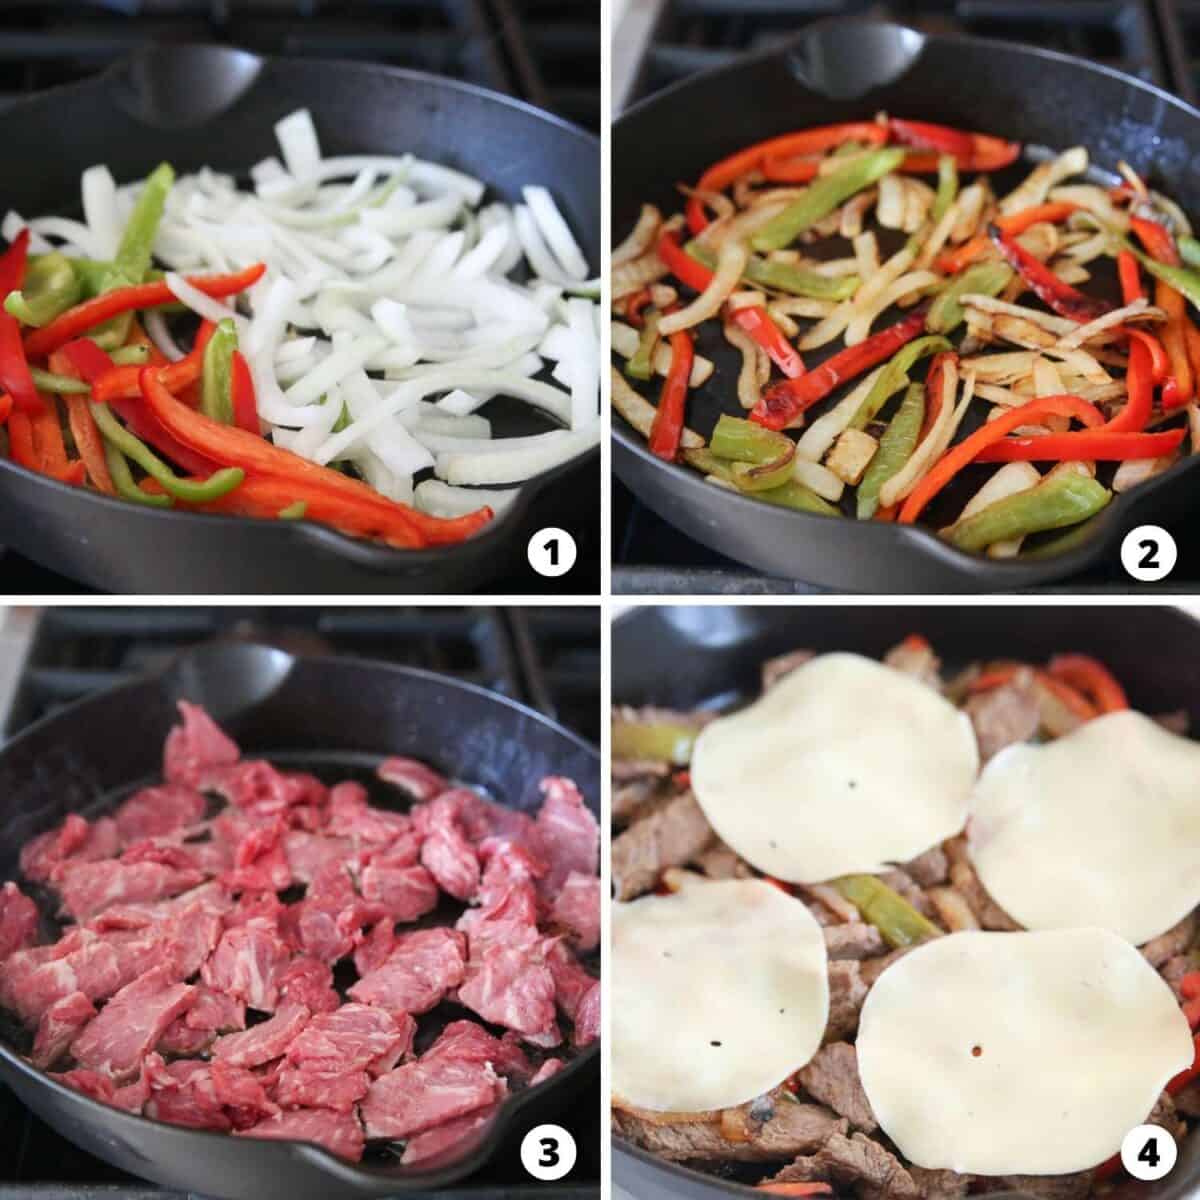 Step by step collage making philly cheesesteak.